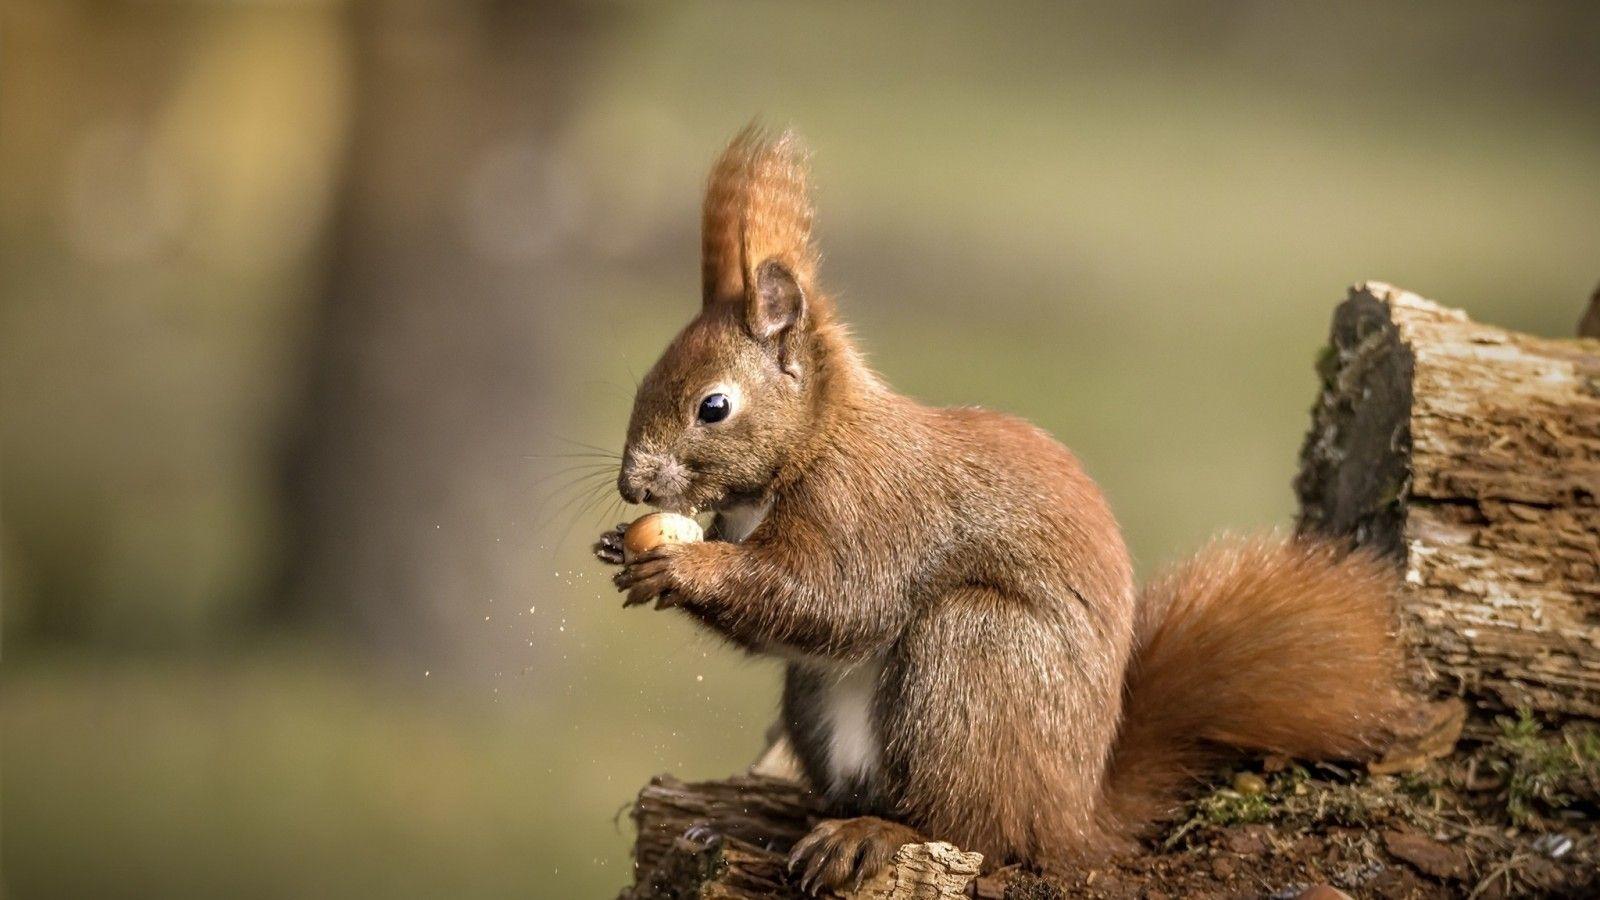 Download 1600x900 Squirrel, Eating, Rodent, Wood, Wild Wallpaper